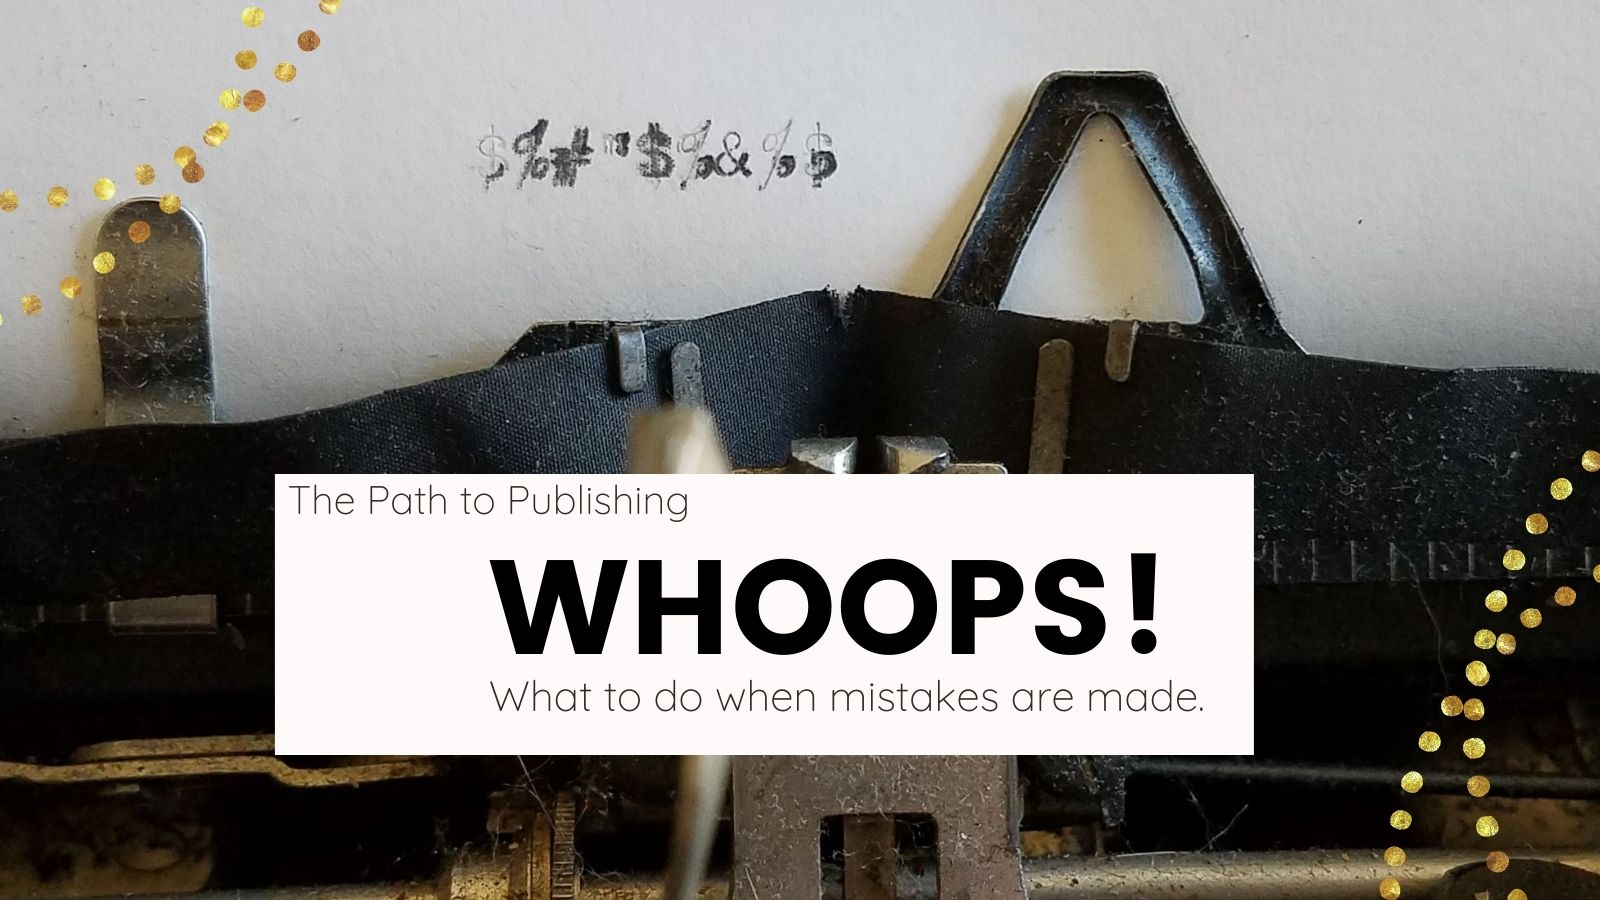 The Path to Publishing, Part 10: Whoops!